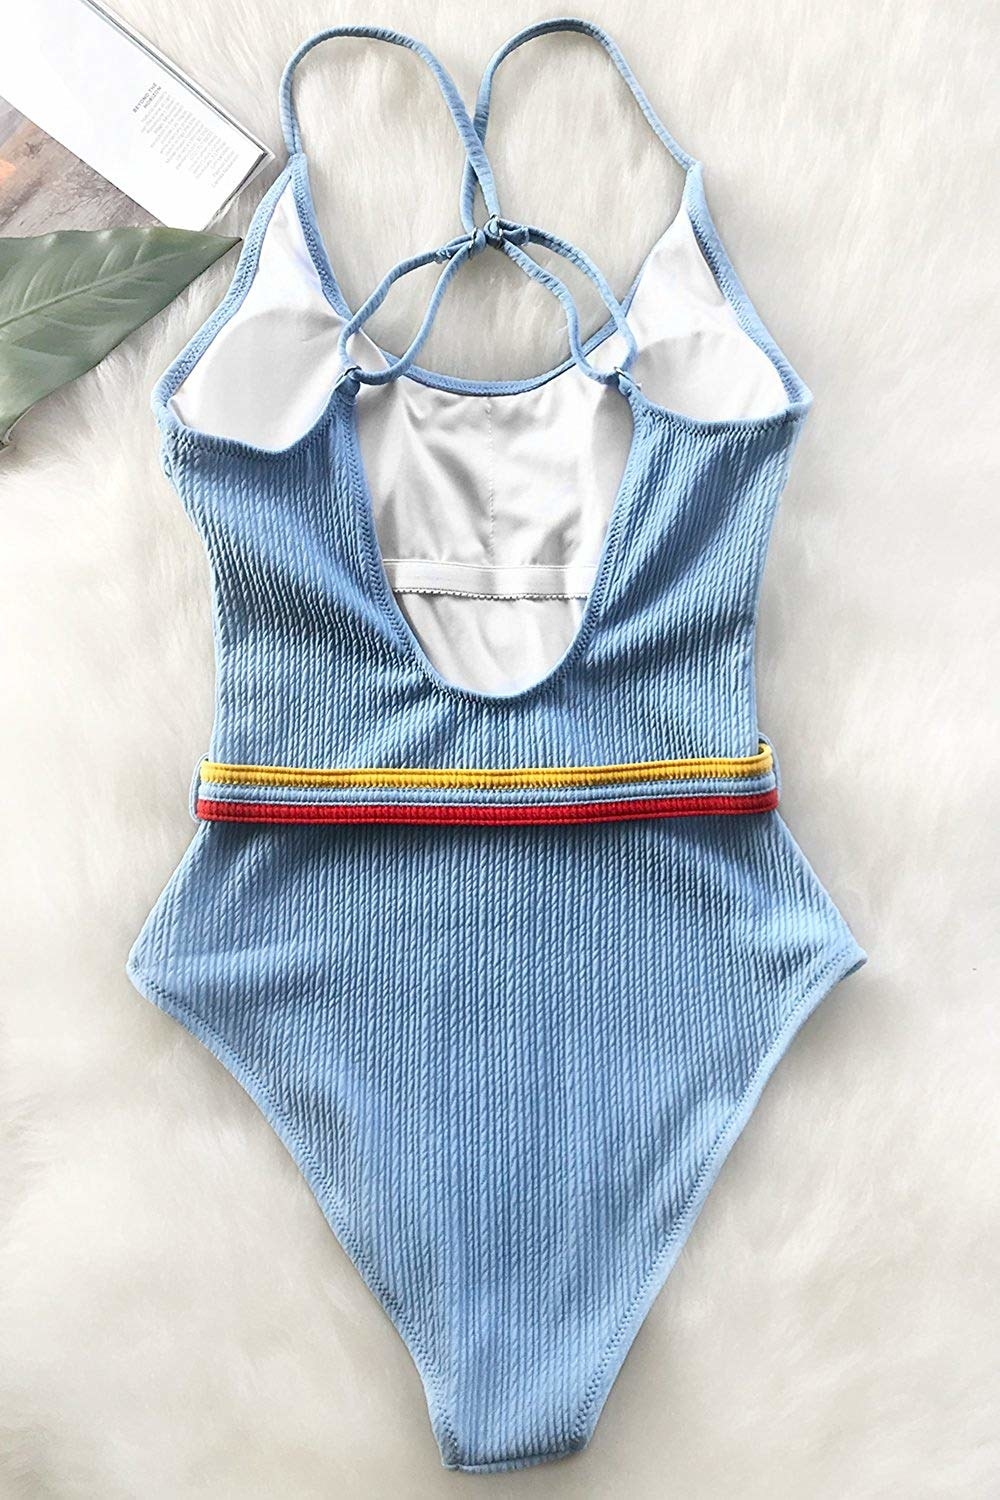 38 Unique Bathing Suits That'll Make You The Coolest Person At The Pool